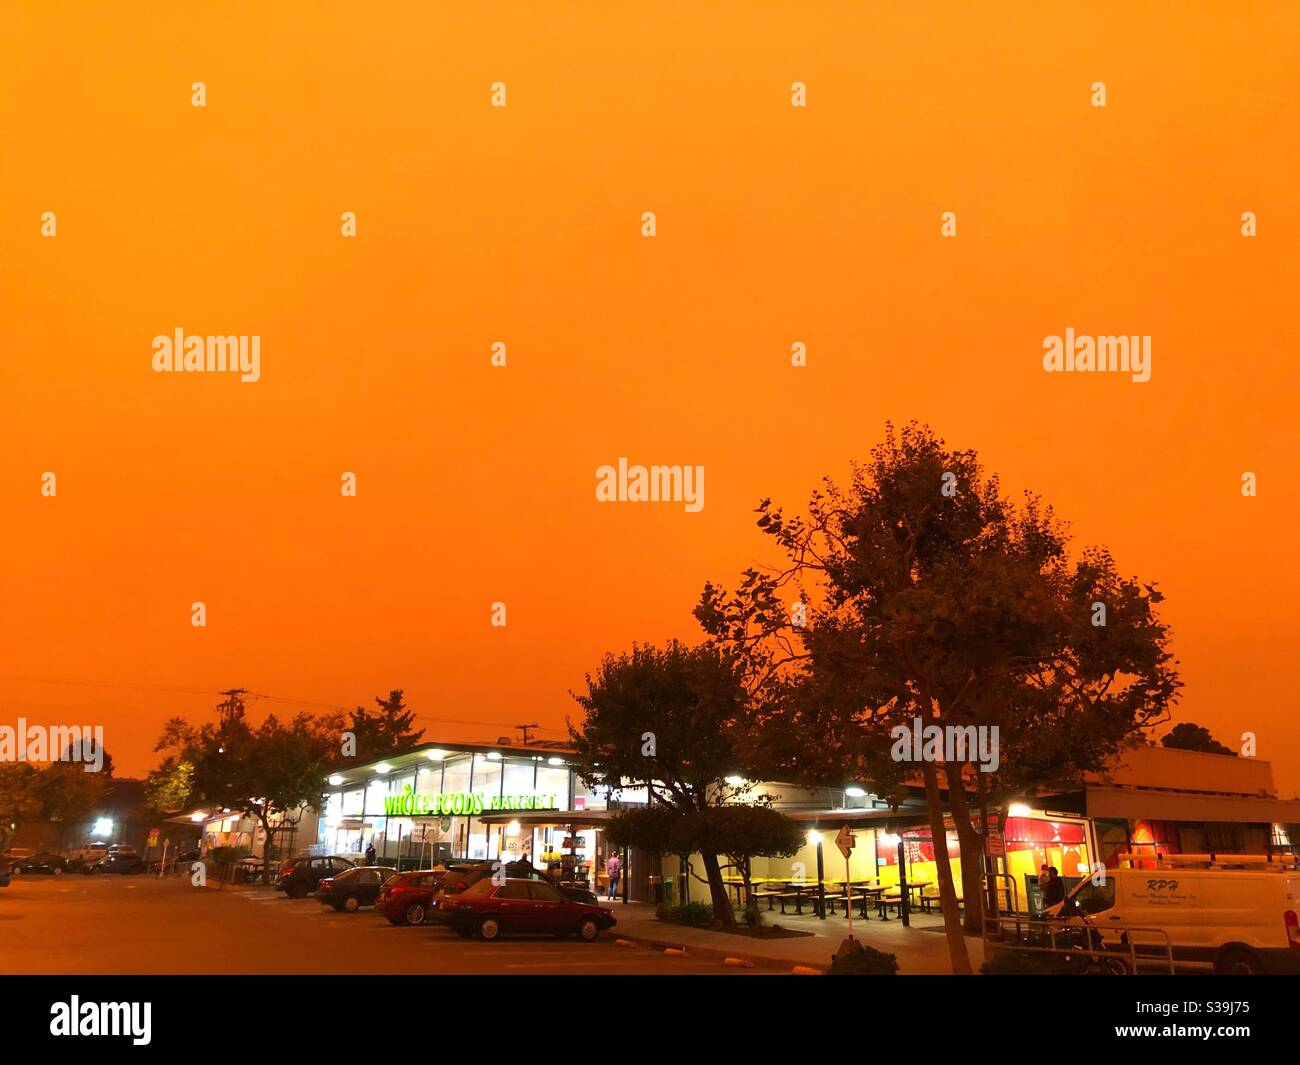 September 9, 2020 at 9:12am at the corner of Ashby and Telegraph in Berkeley, California.  The red sky is caused by smoke from the fires to the East and north blowing in this direction towards the Bay Stock Photo